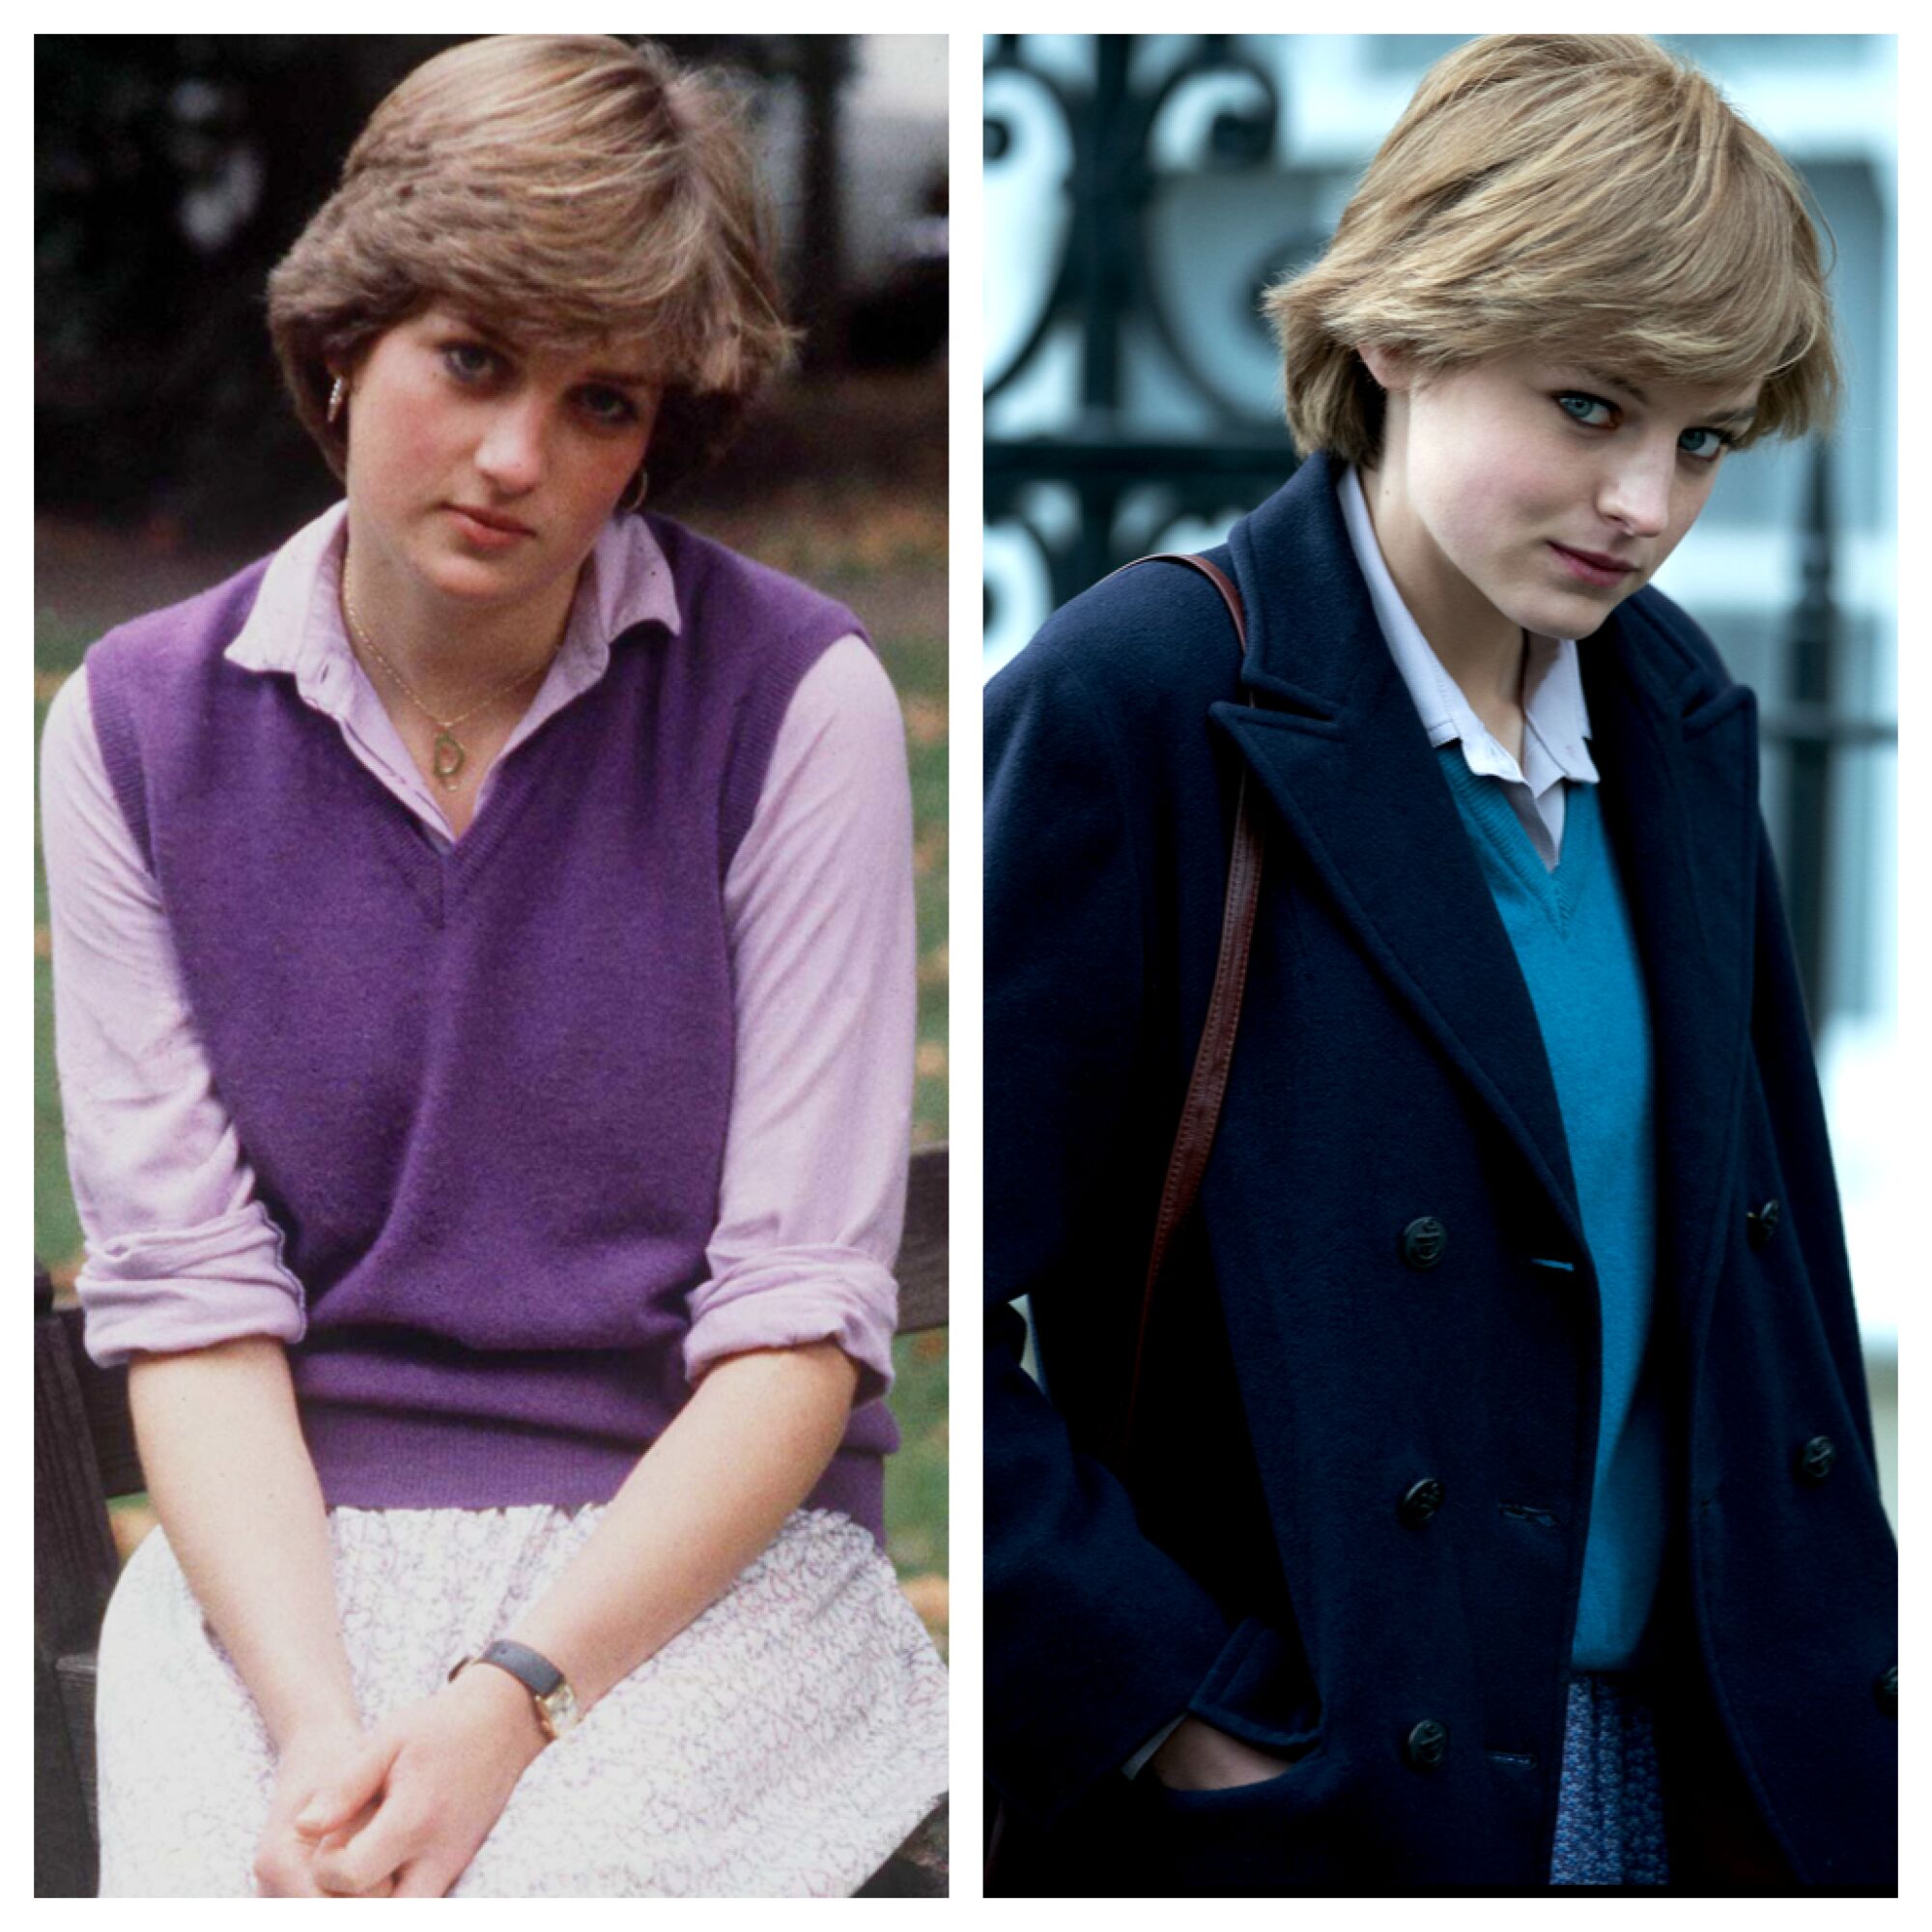 A side-by-side comparison of Diana, Princess of Wales, and actress Emma Corrin